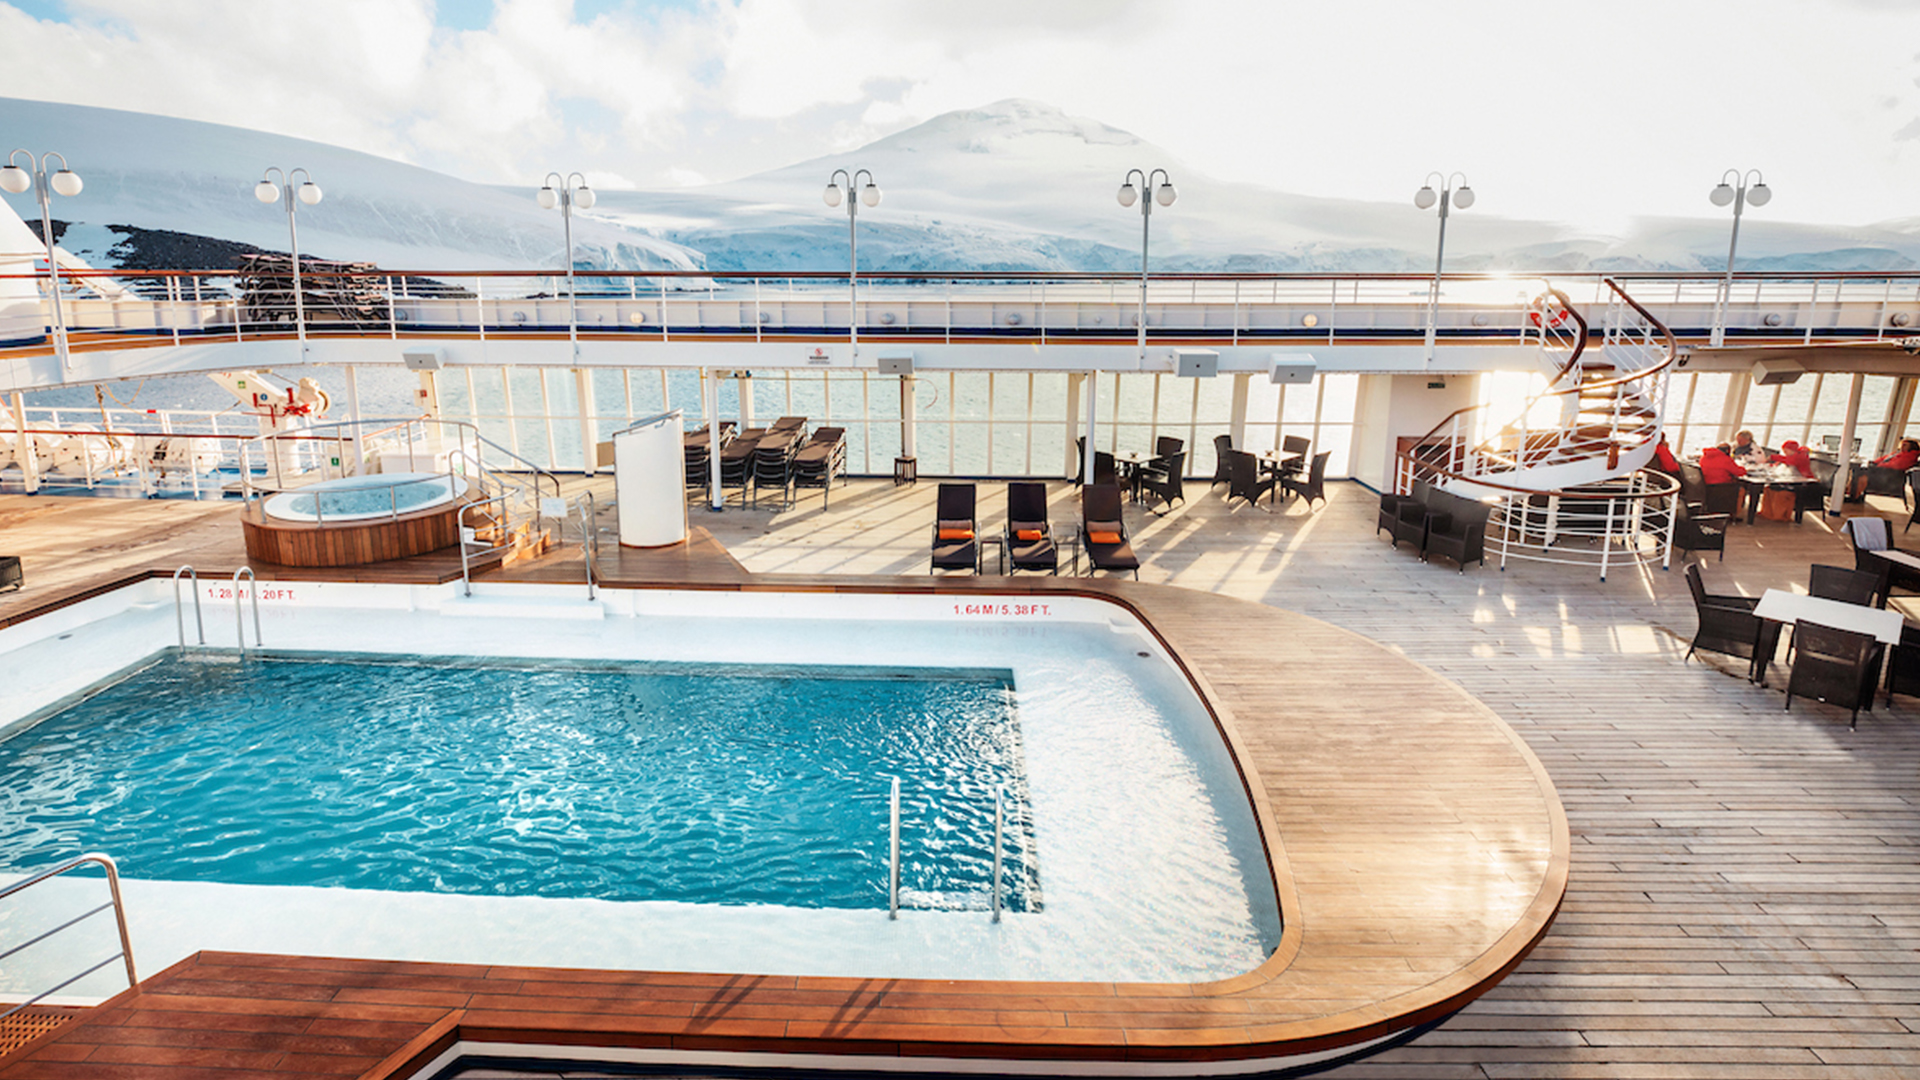 Pool Deck of the Silver Cloud